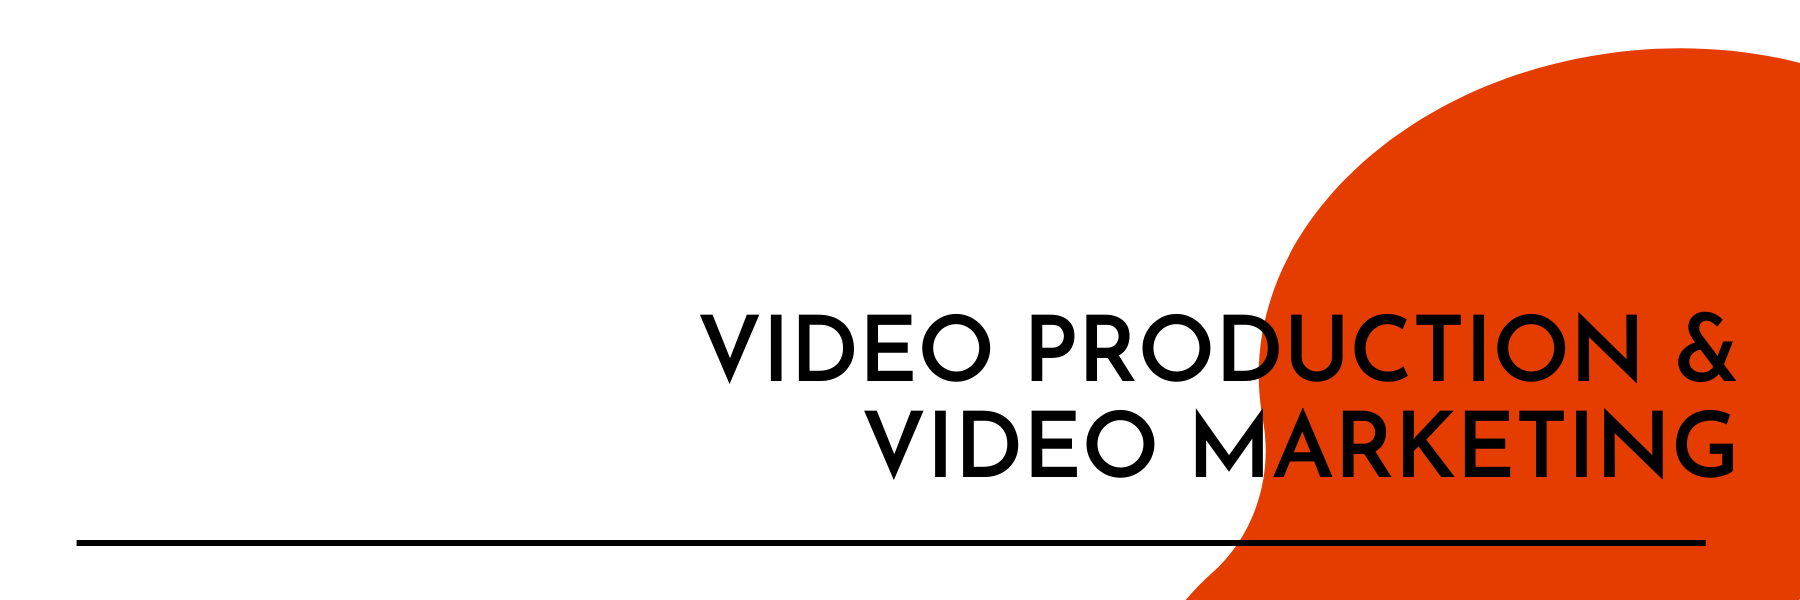 Videoproduction&marketing